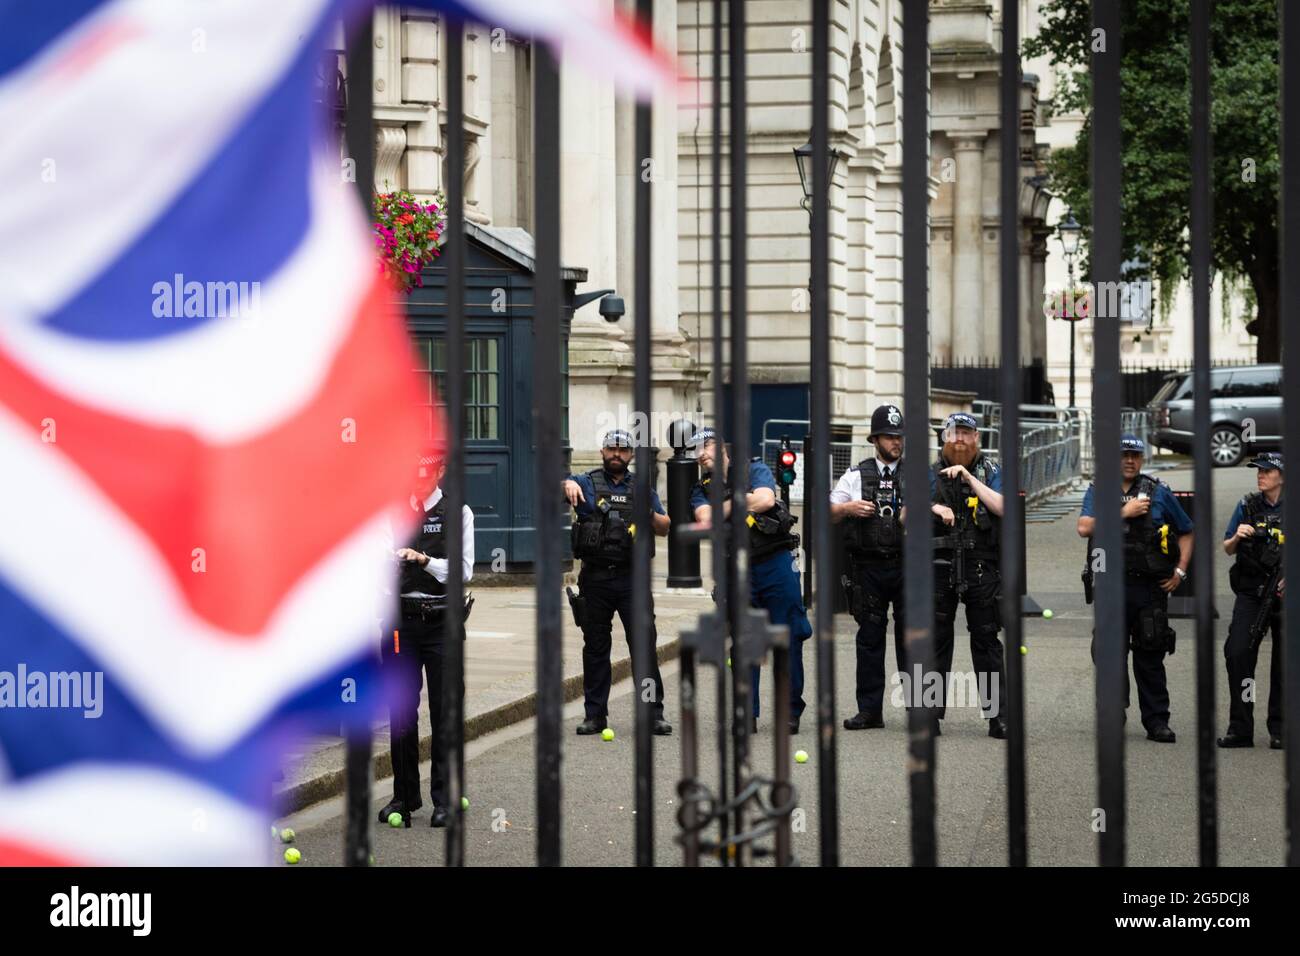 London, UK. 26th June, 2021. Police stand guard at Downing Street while a anti-lockdown protest passes. Thousands of people marched to raise their concerns regarding government legislation centred around vaccinations and freedom to travel.ÊAndy Barton/Alamy Live News Credit: Andy Barton/Alamy Live News Stock Photo